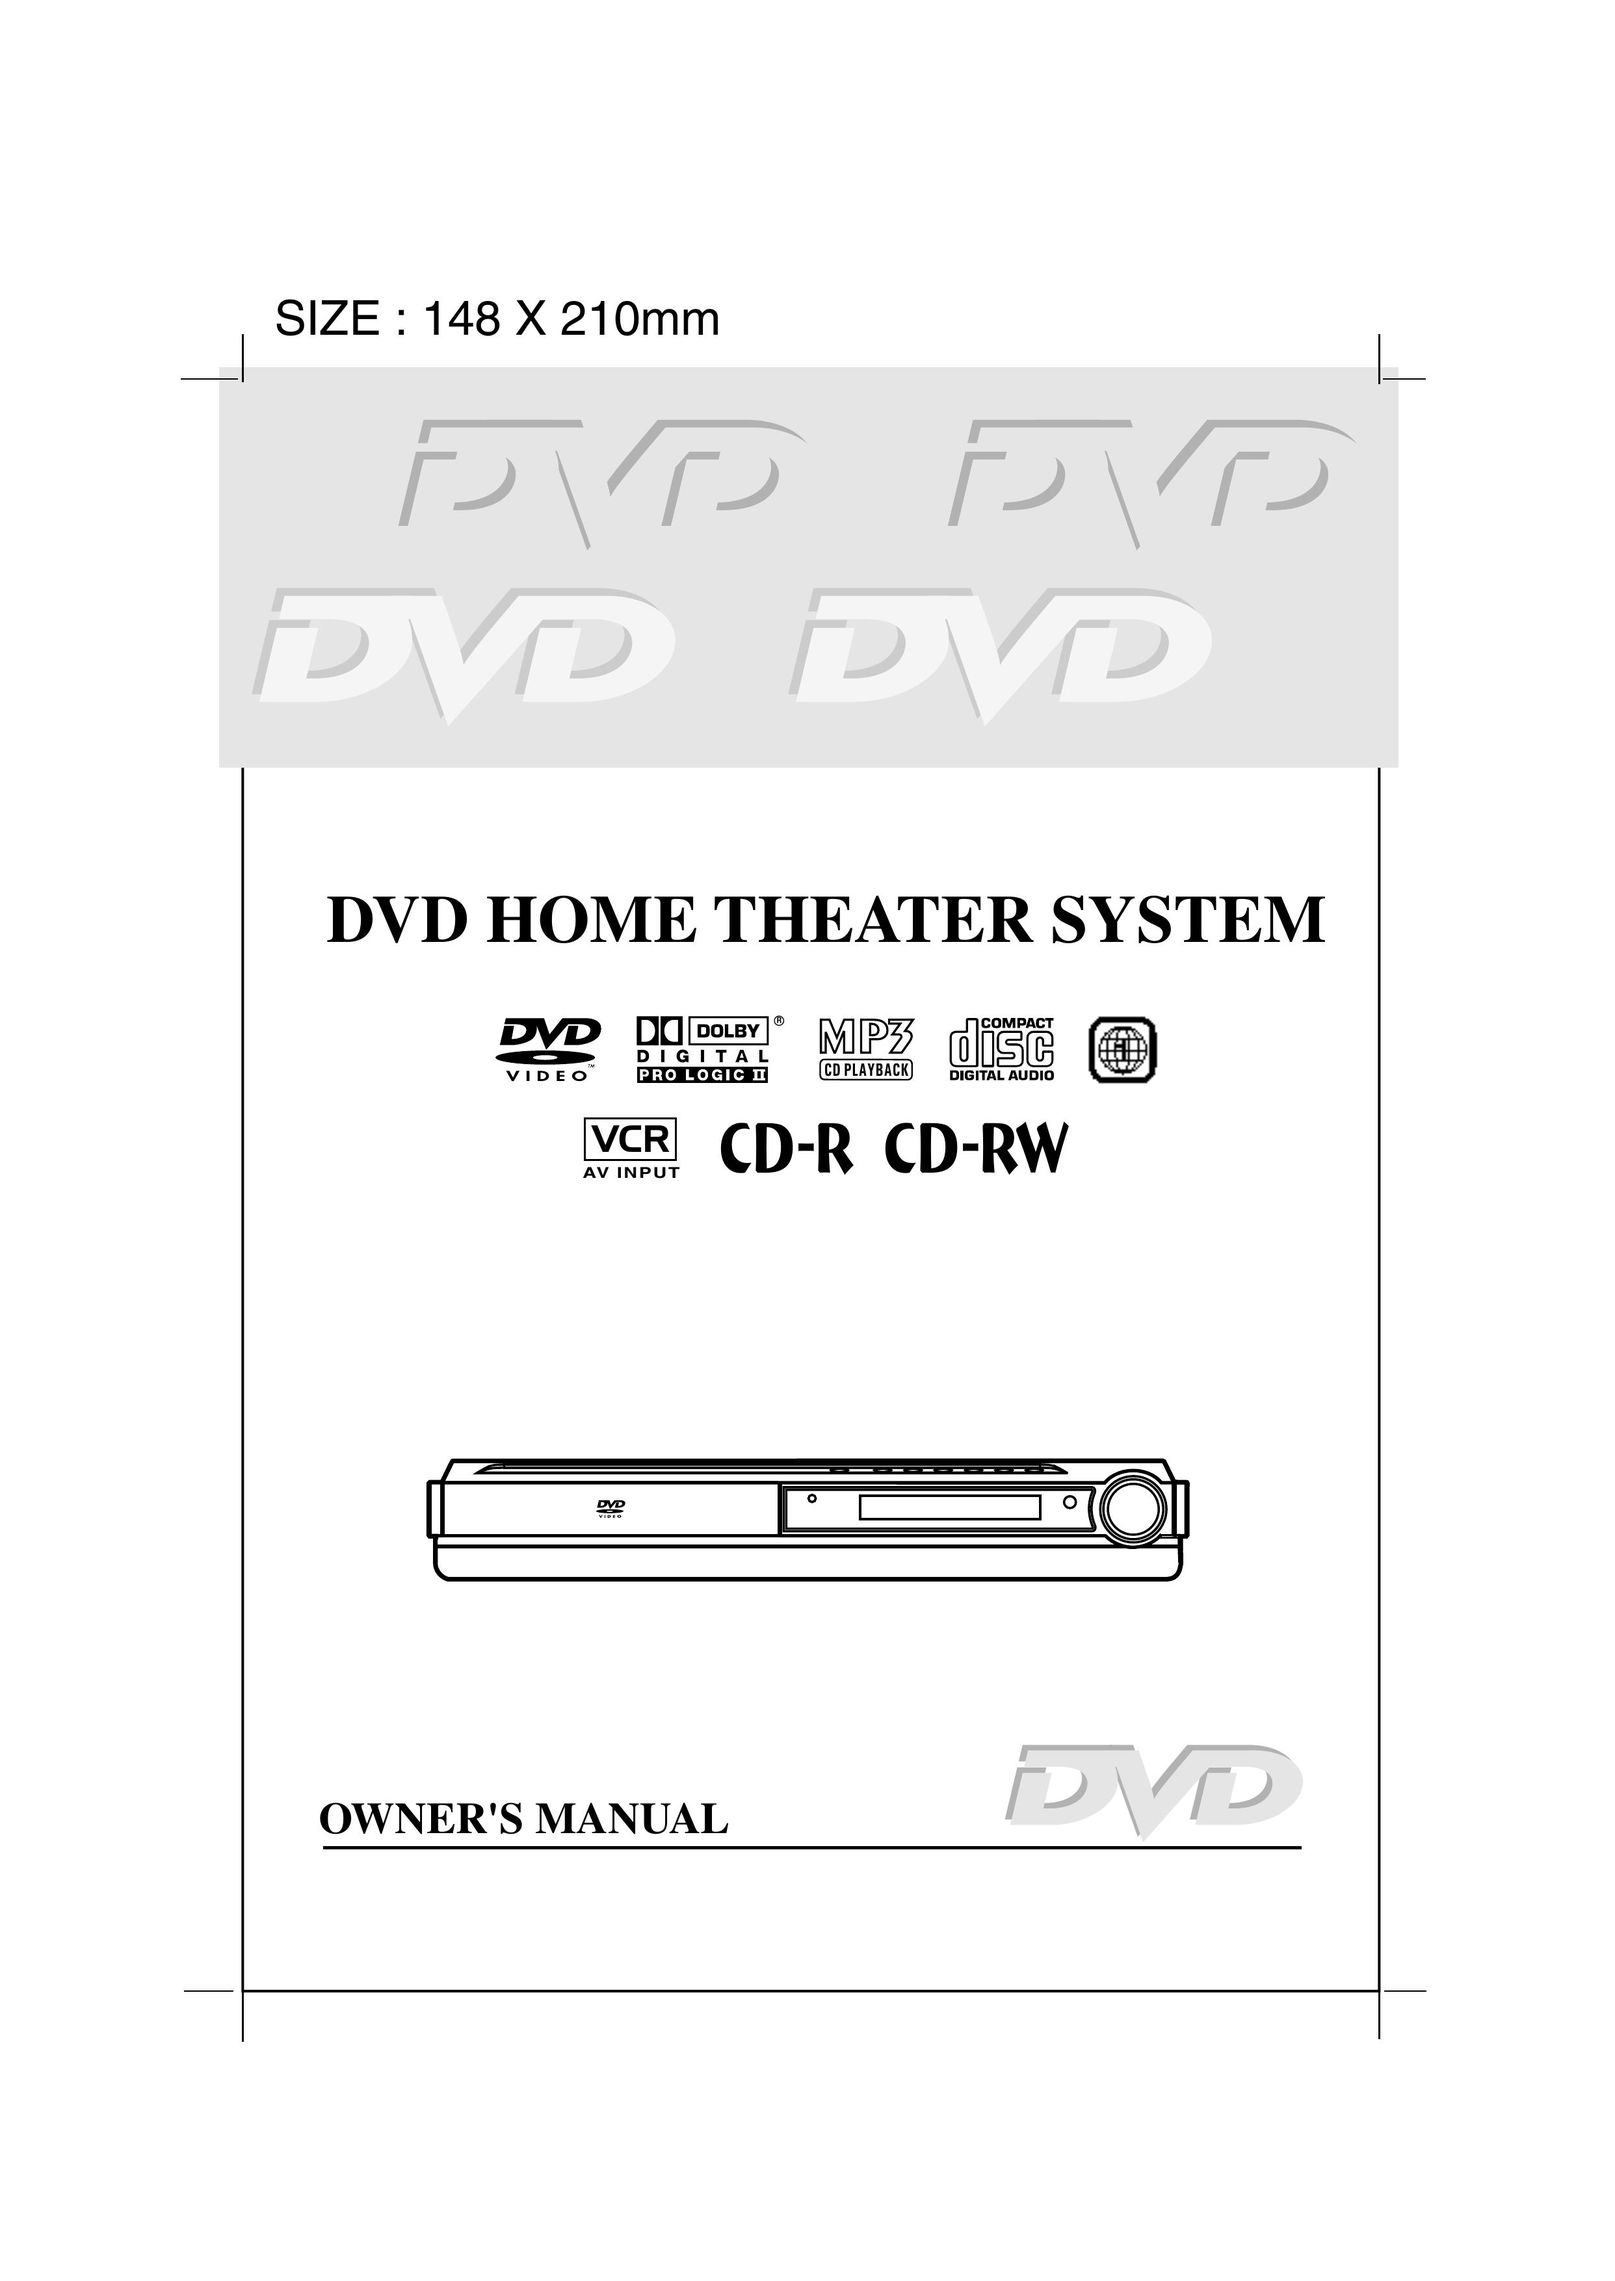 Audiovox DVD Home Theatre System CD-R/RW CD Playback Home Theater System User Manual